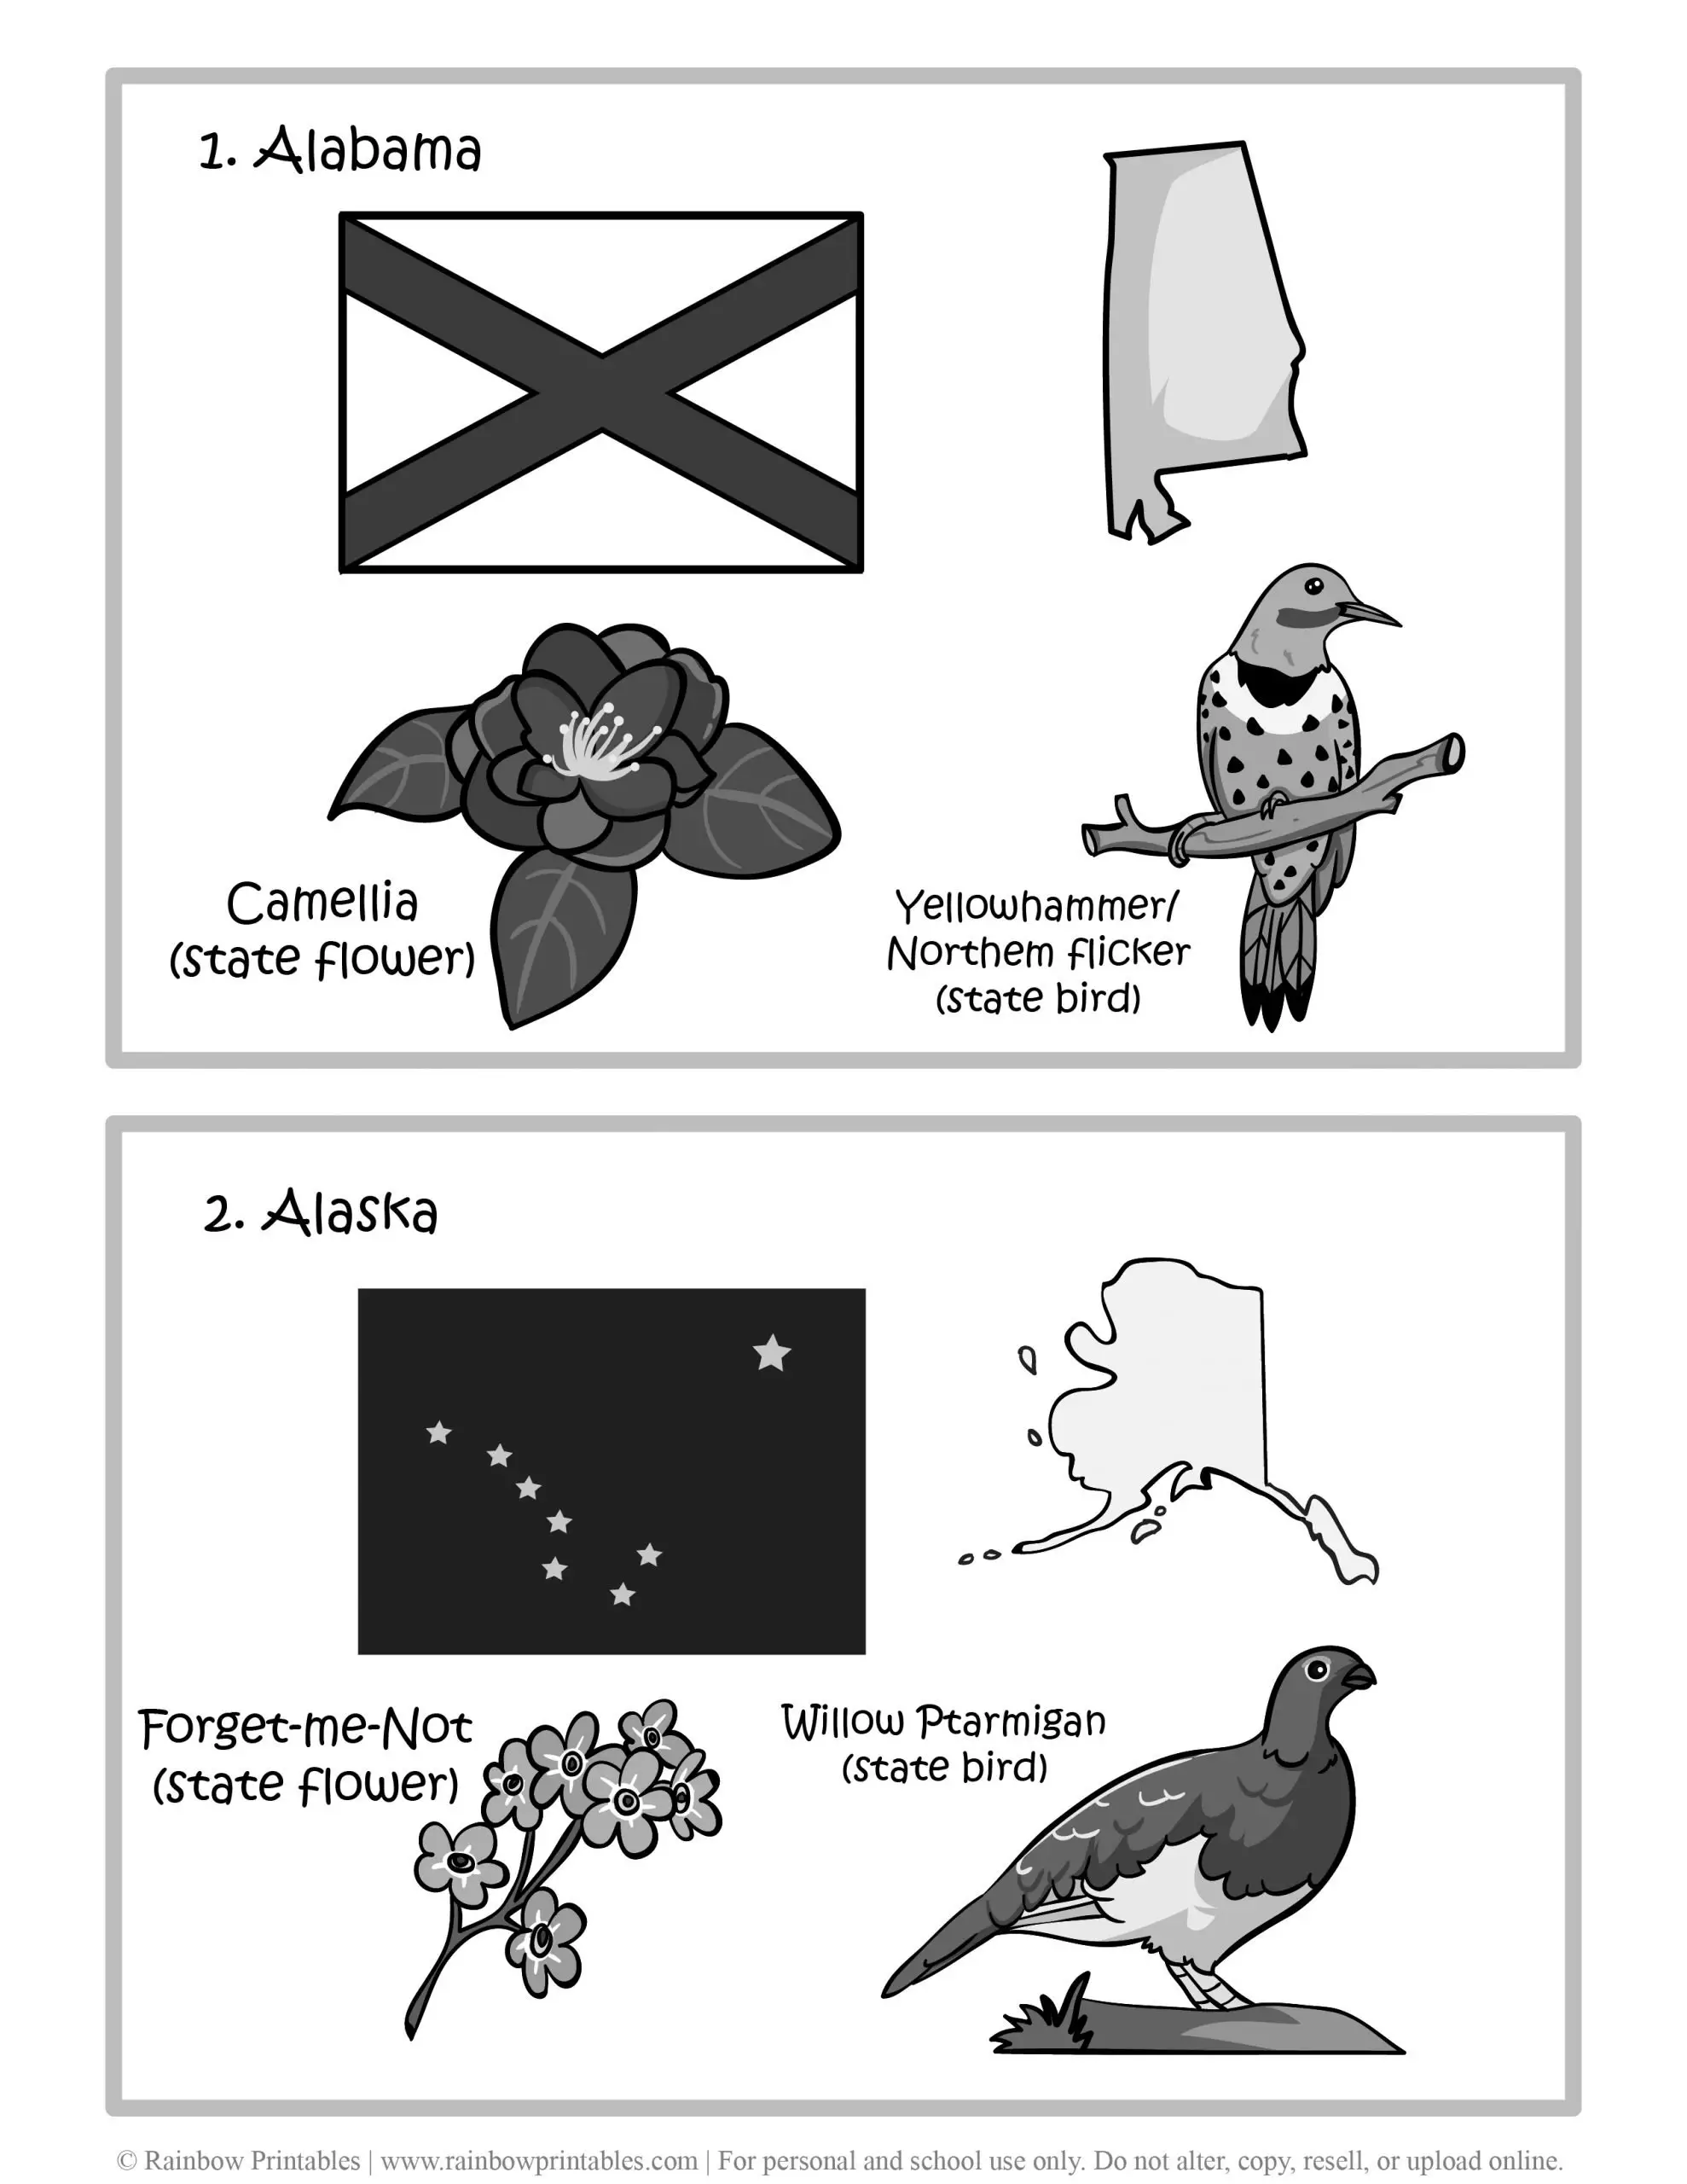 Alabama, Alaska, 50 US State Flag, State Bird, State Flower, United States of America - American States Geography Worksheet Class Lesson Printables Flashcards Black White